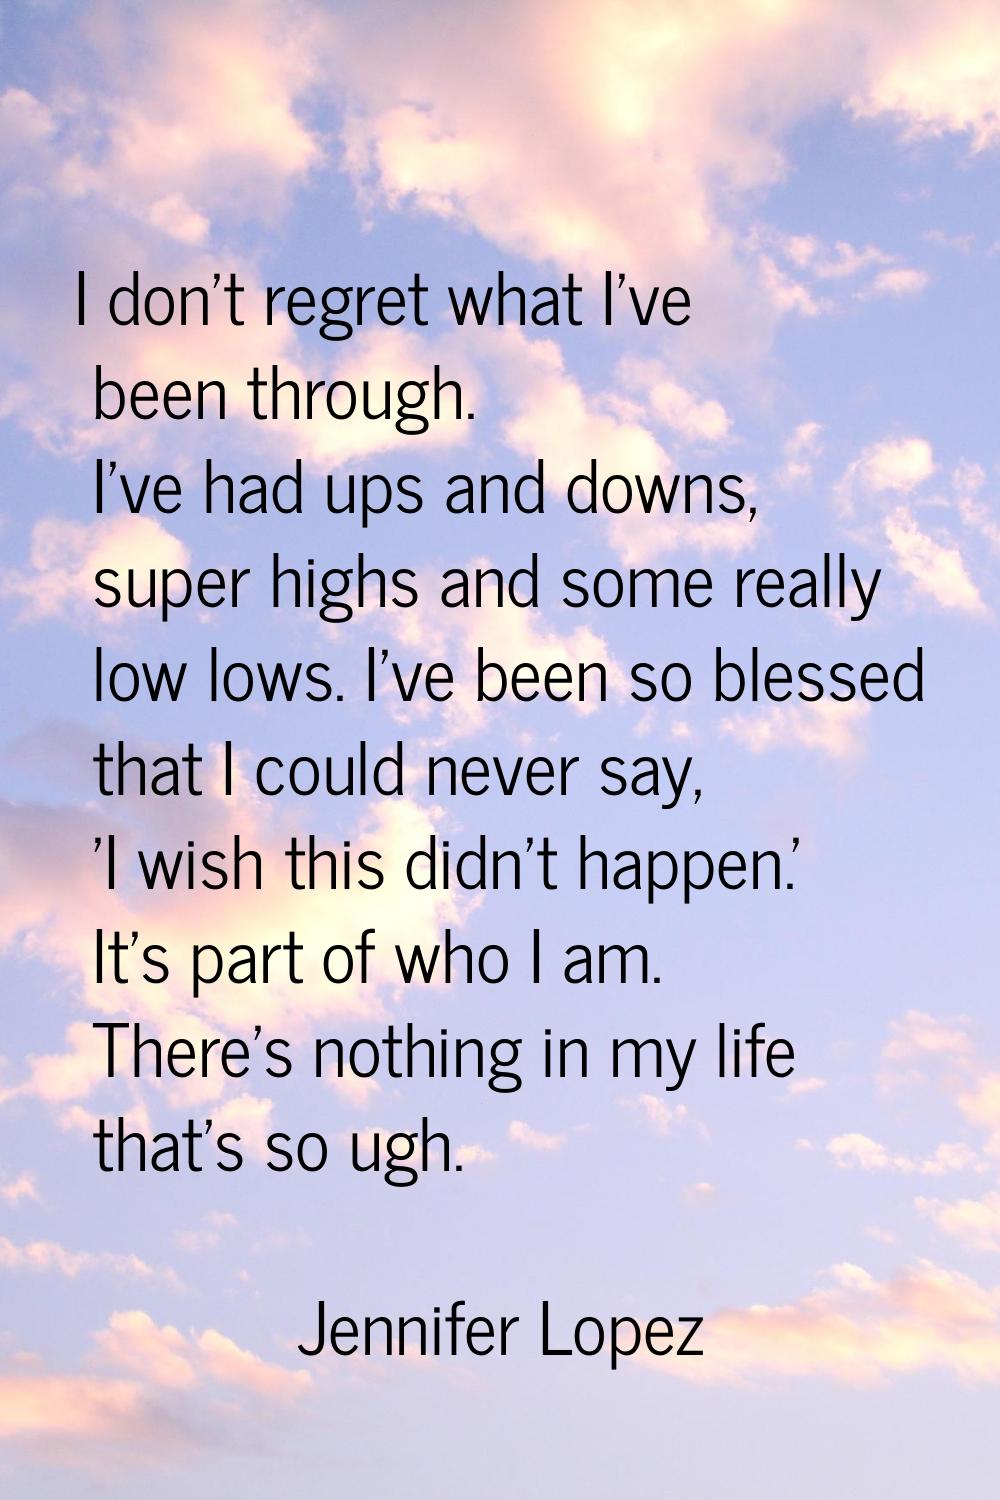 I don't regret what I've been through. I've had ups and downs, super highs and some really low lows